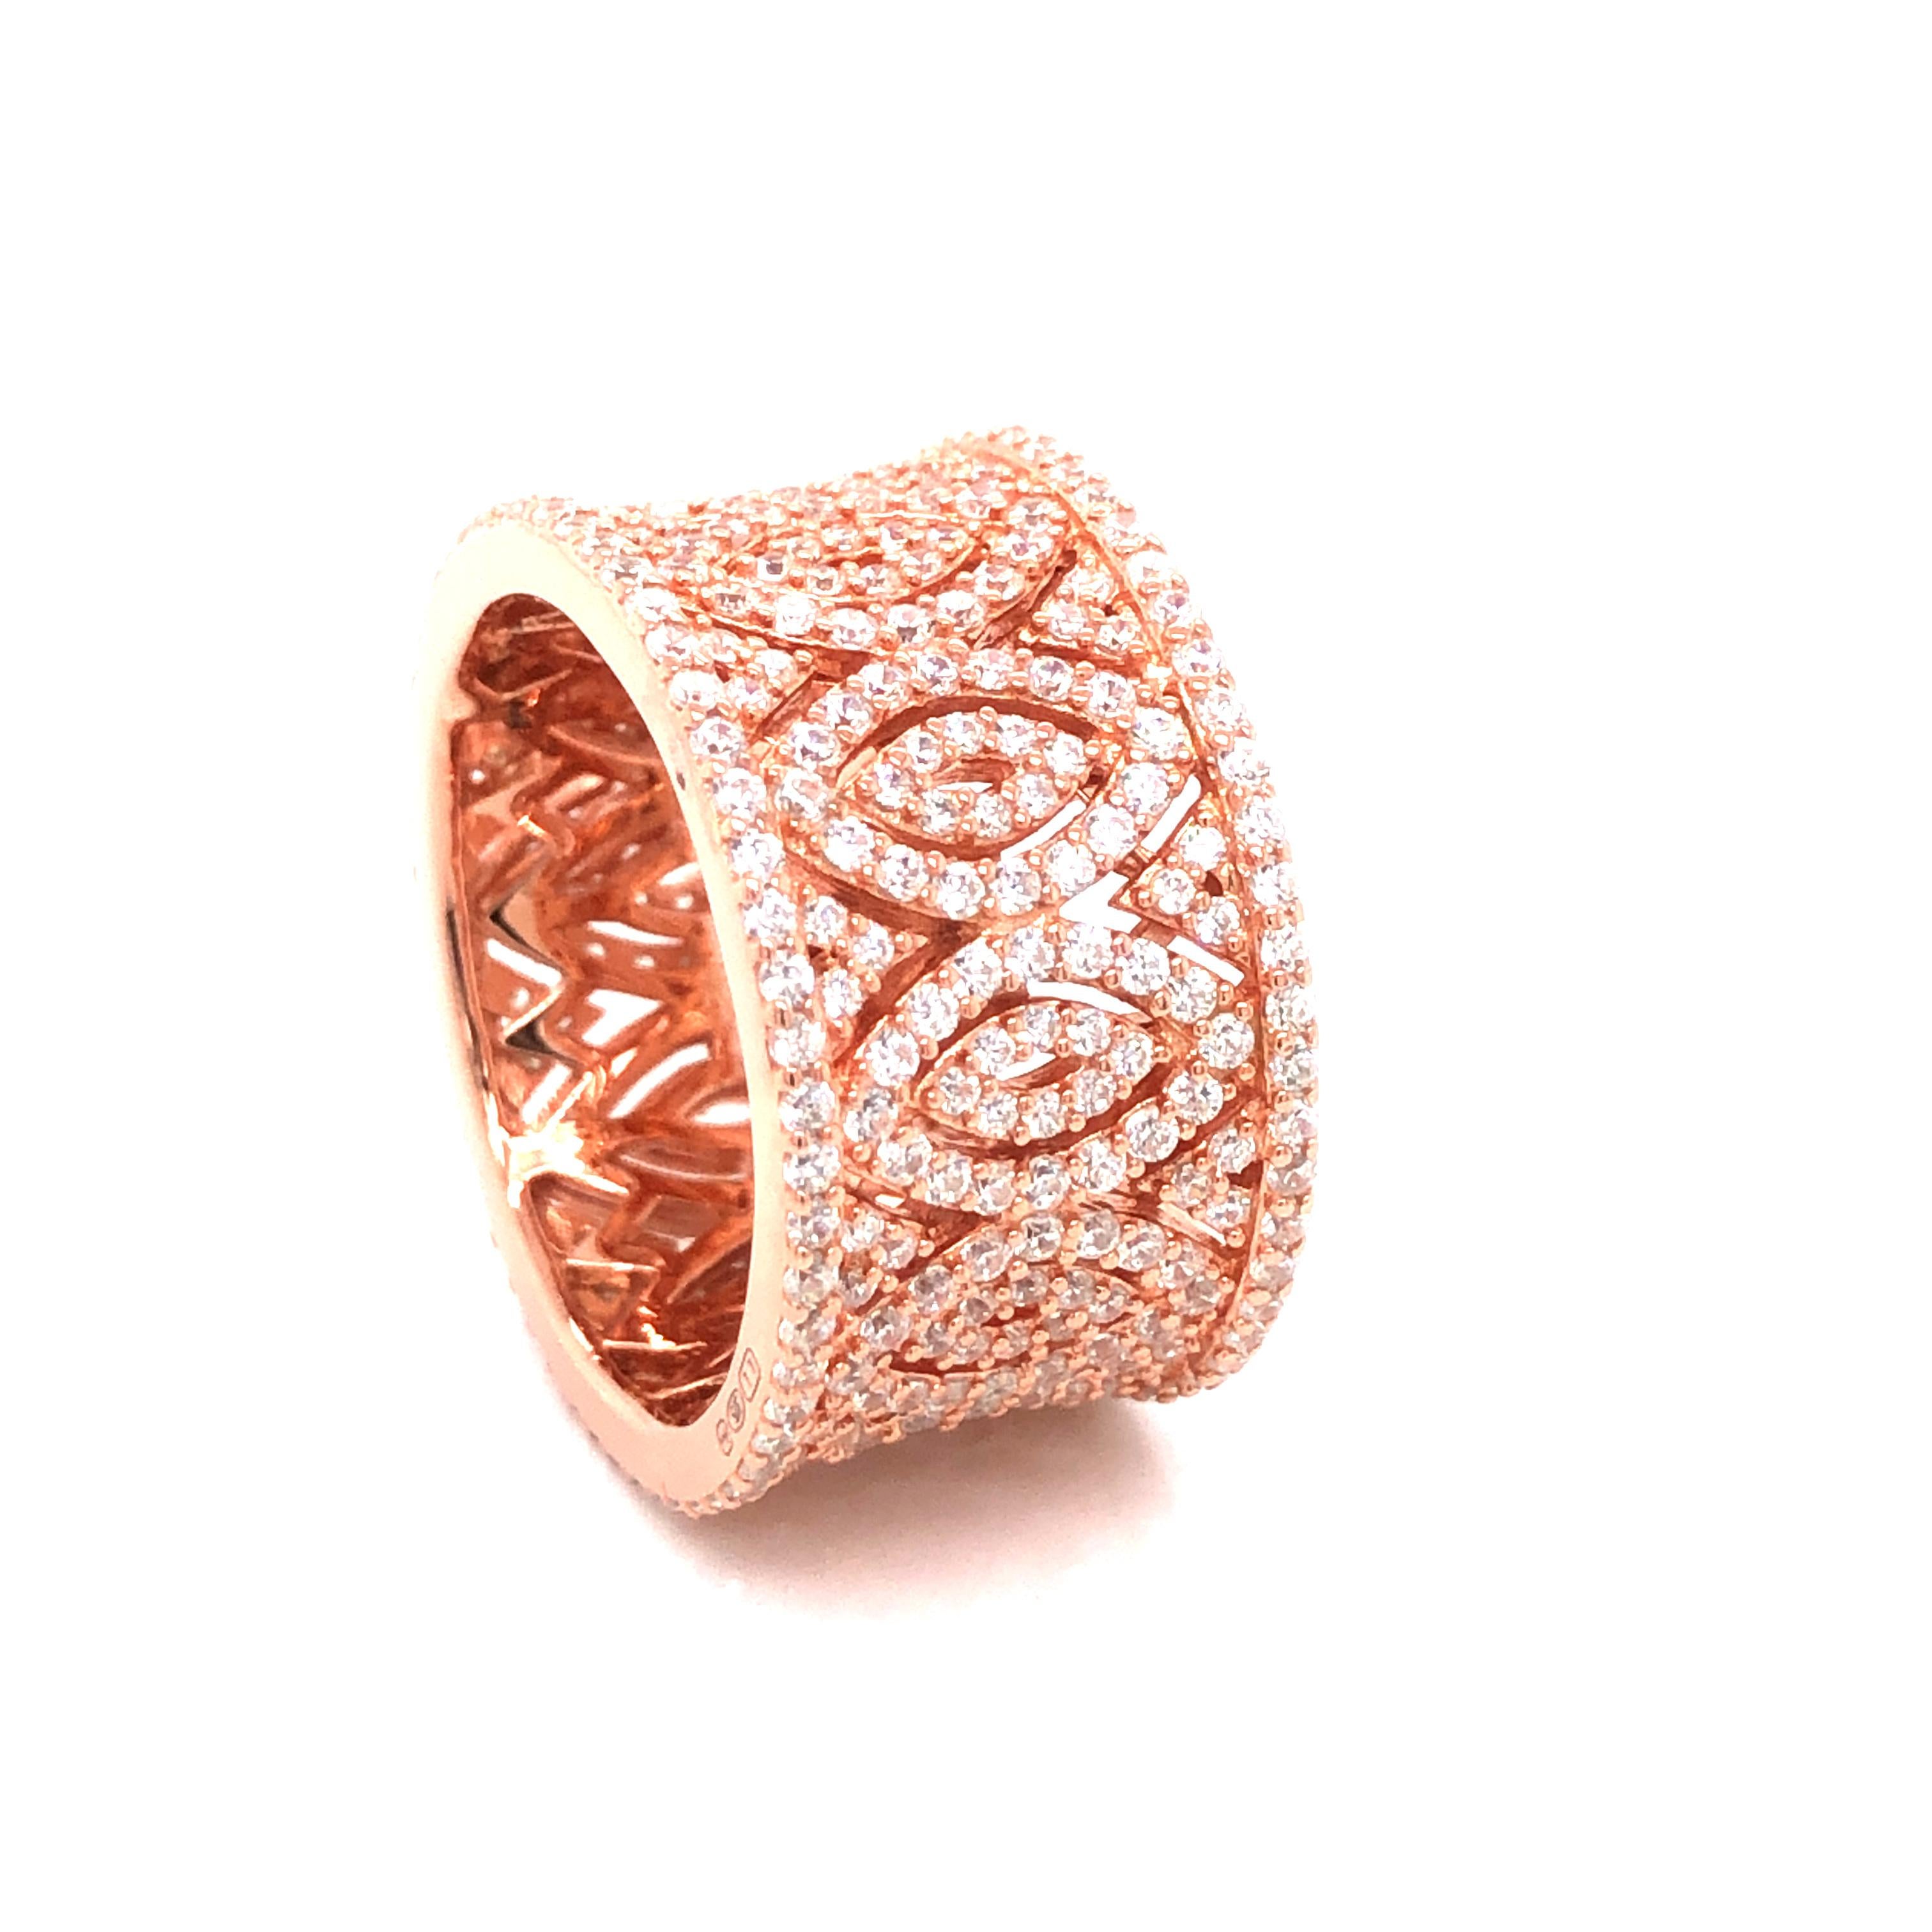 Mixing femininity and contemporary design, this intricate ring is sumptuous and exciting. 

Featuring 3.40 carat of pave set round brilliant cut cubic zirconia. 

Composed of 925 sterling silver with either a 14ct rose gold, 14kt yellow gold or a